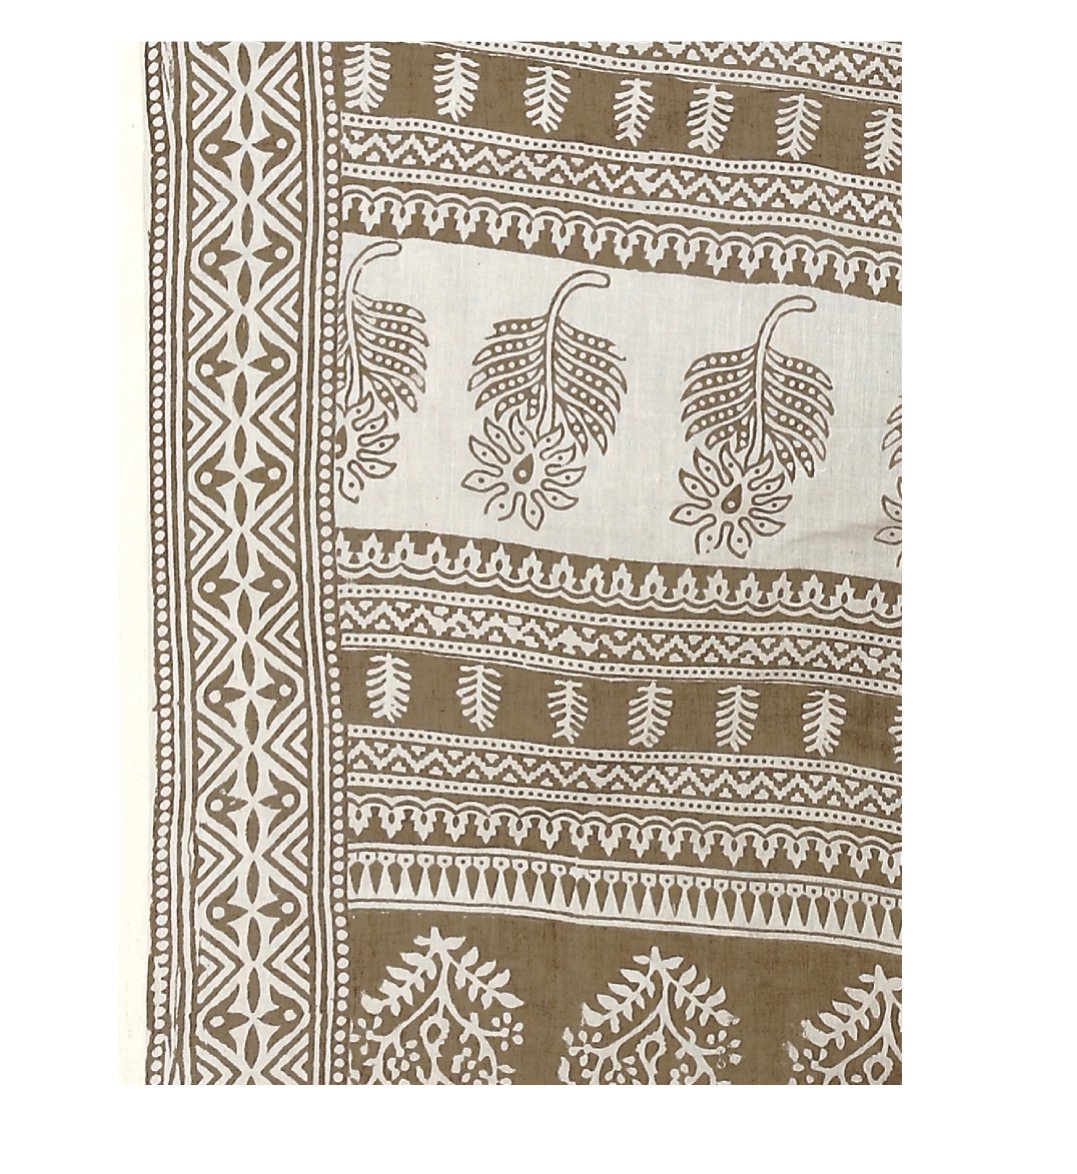 Off-White Cotton Hand Block Bagh Print Handcrafted Saree-Saree-Kalakari India-ZIBASA0039-Bagh, Cotton, Geographical Indication, Hand Blocks, Hand Crafted, Heritage Prints, Natural Dyes, Sarees, Sustainable Fabrics-[Linen,Ethnic,wear,Fashionista,Handloom,Handicraft,Indigo,blockprint,block,print,Cotton,Chanderi,Blue, latest,classy,party,bollywood,trendy,summer,style,traditional,formal,elegant,unique,style,hand,block,print, dabu,booti,gift,present,glamorous,affordable,collectible,Sari,Saree,printed